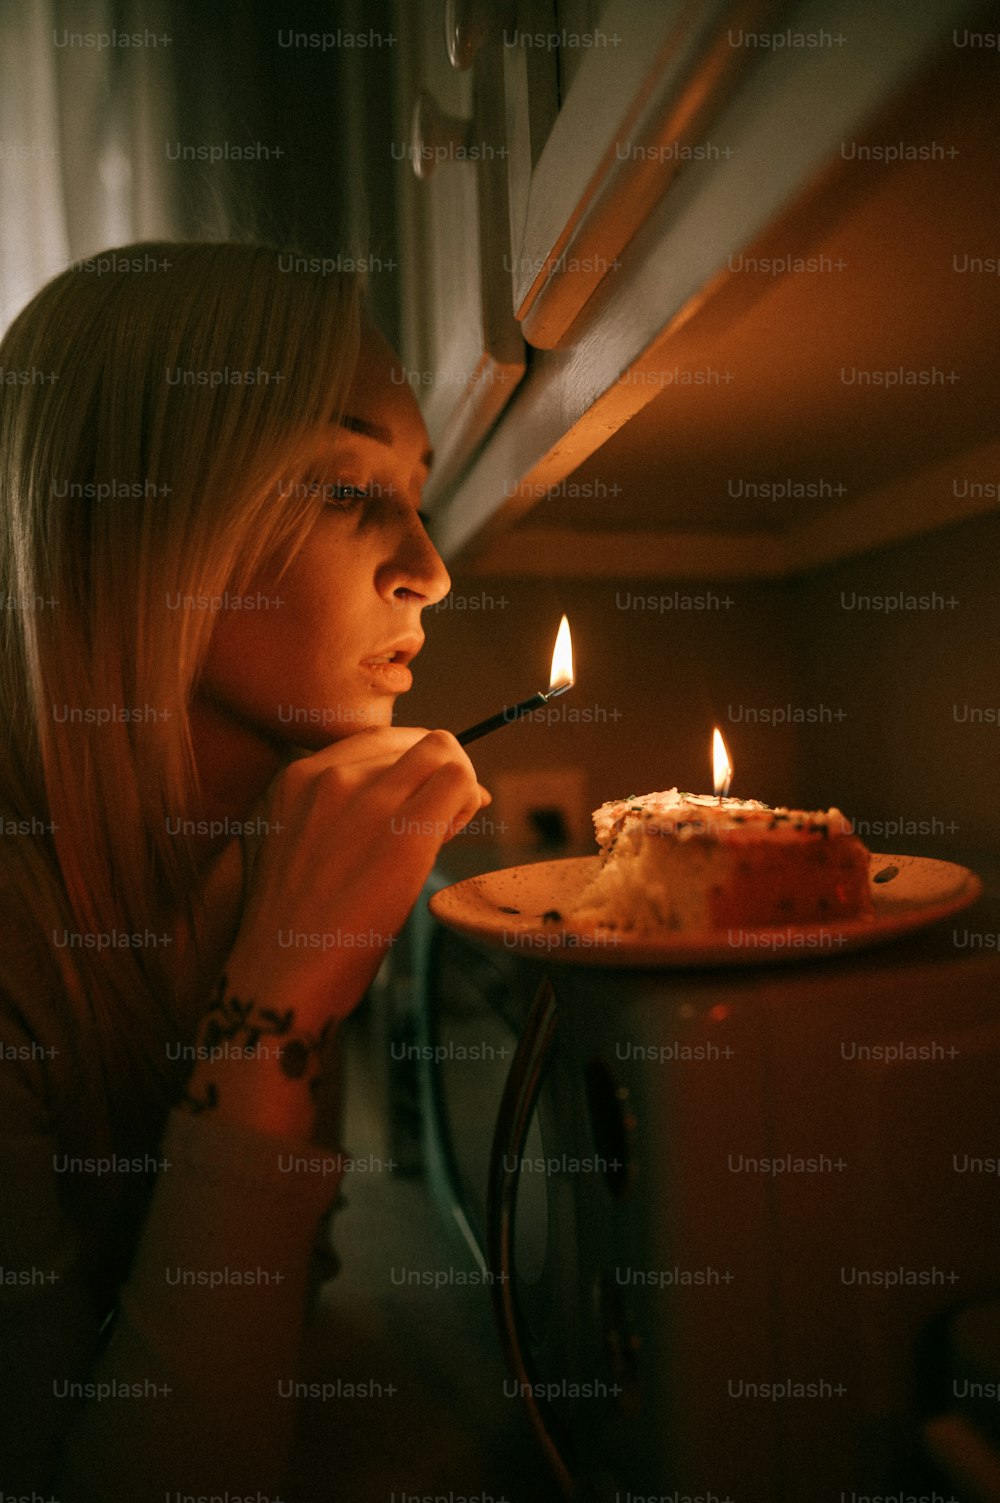 a woman looking at a cake with a lit candle on it